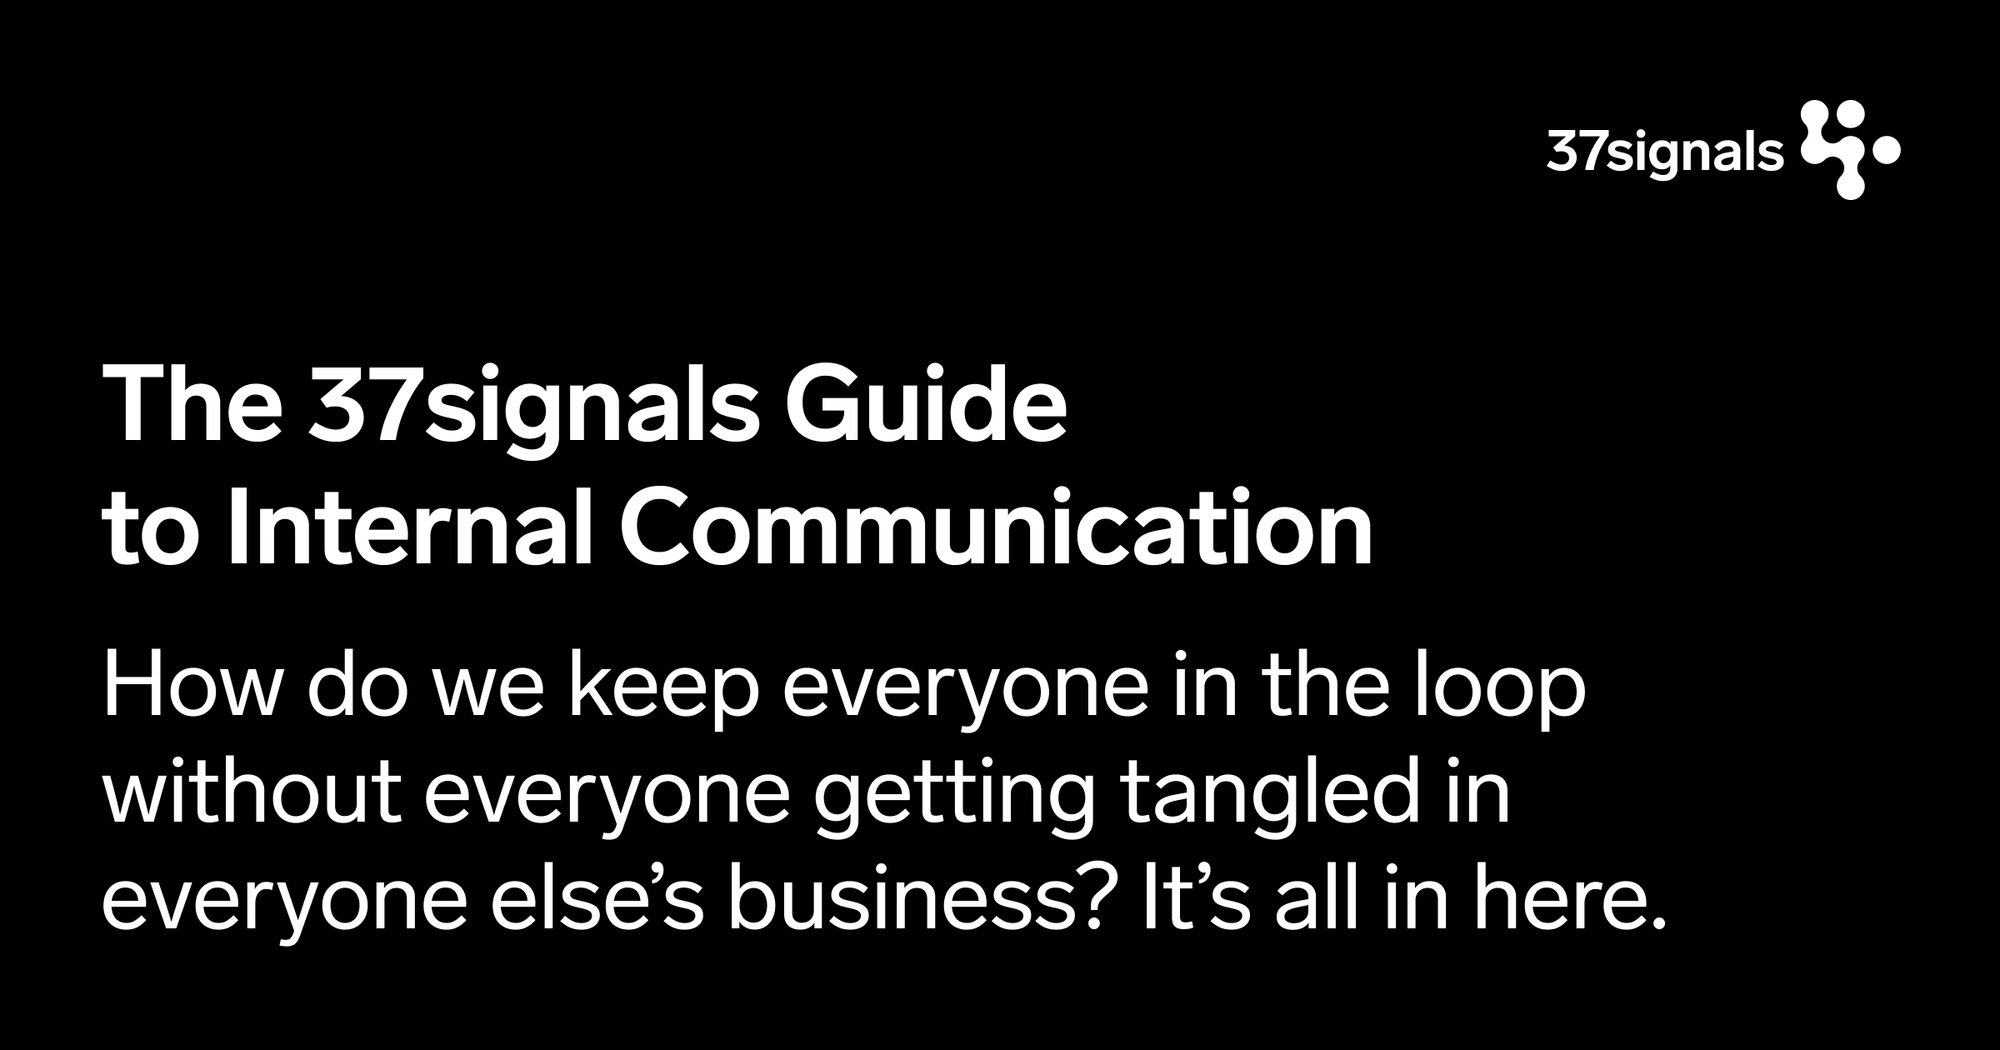 The 37signals Guide to Internal Communication